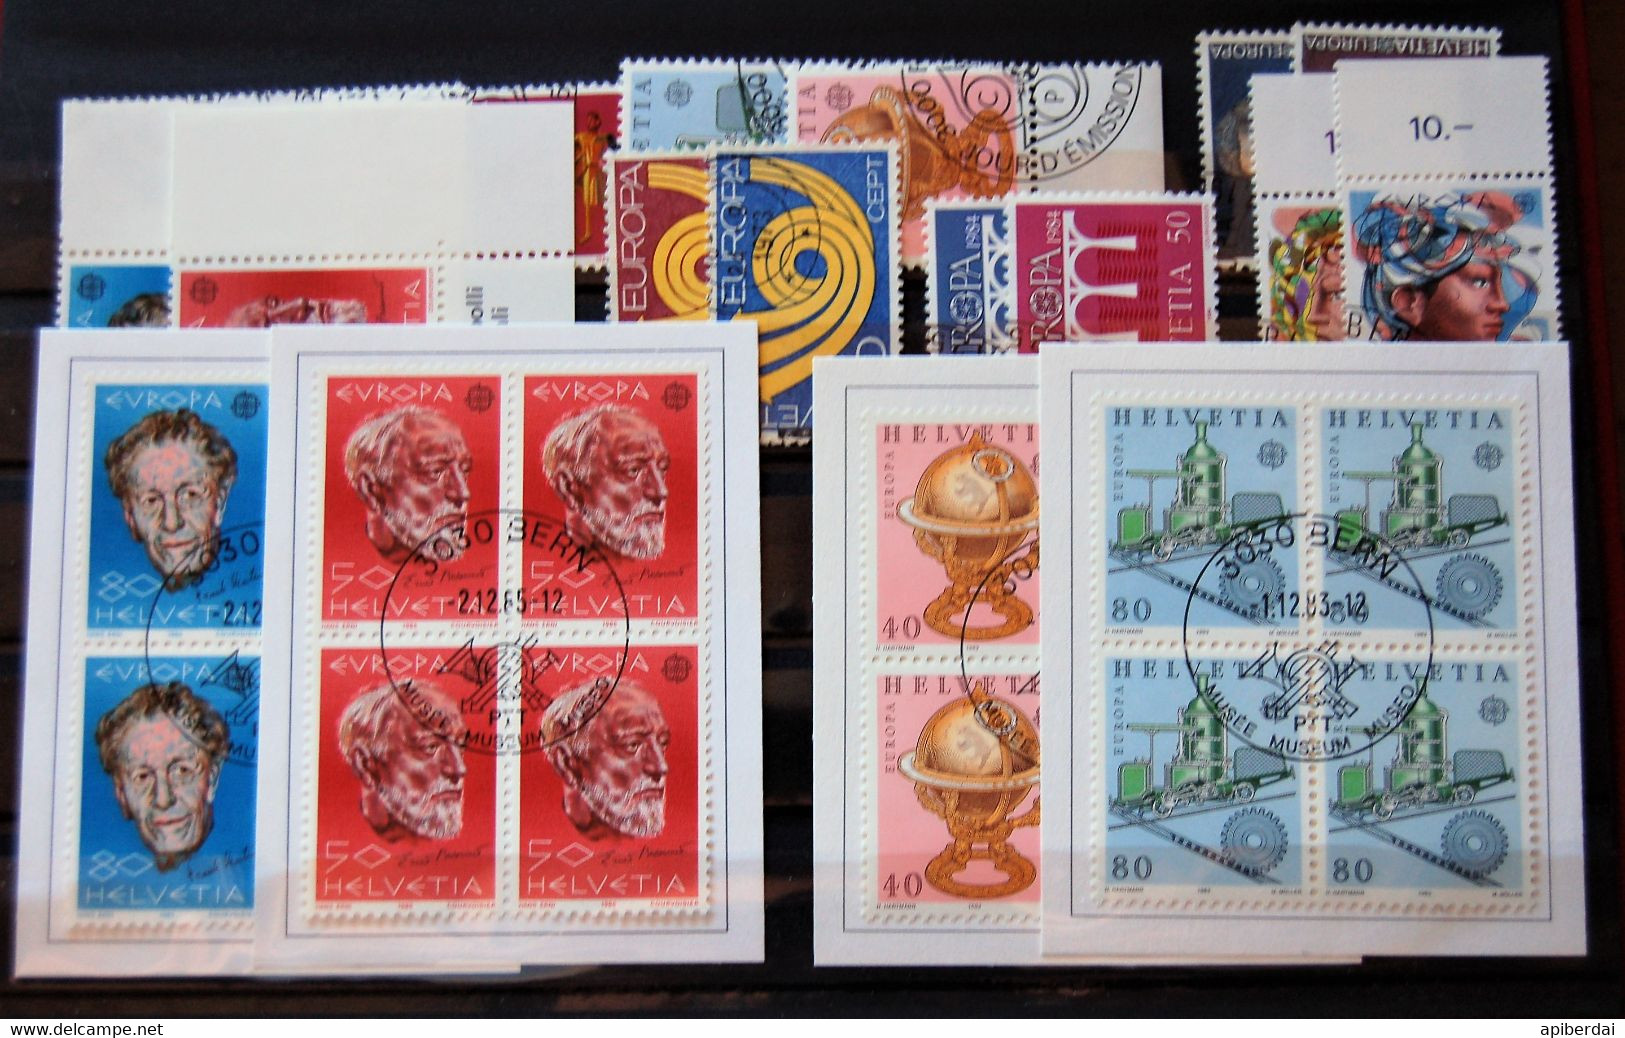 Suisse Switzerland - Small Batch Of  9 Series "europa" Stamps Used - Collections